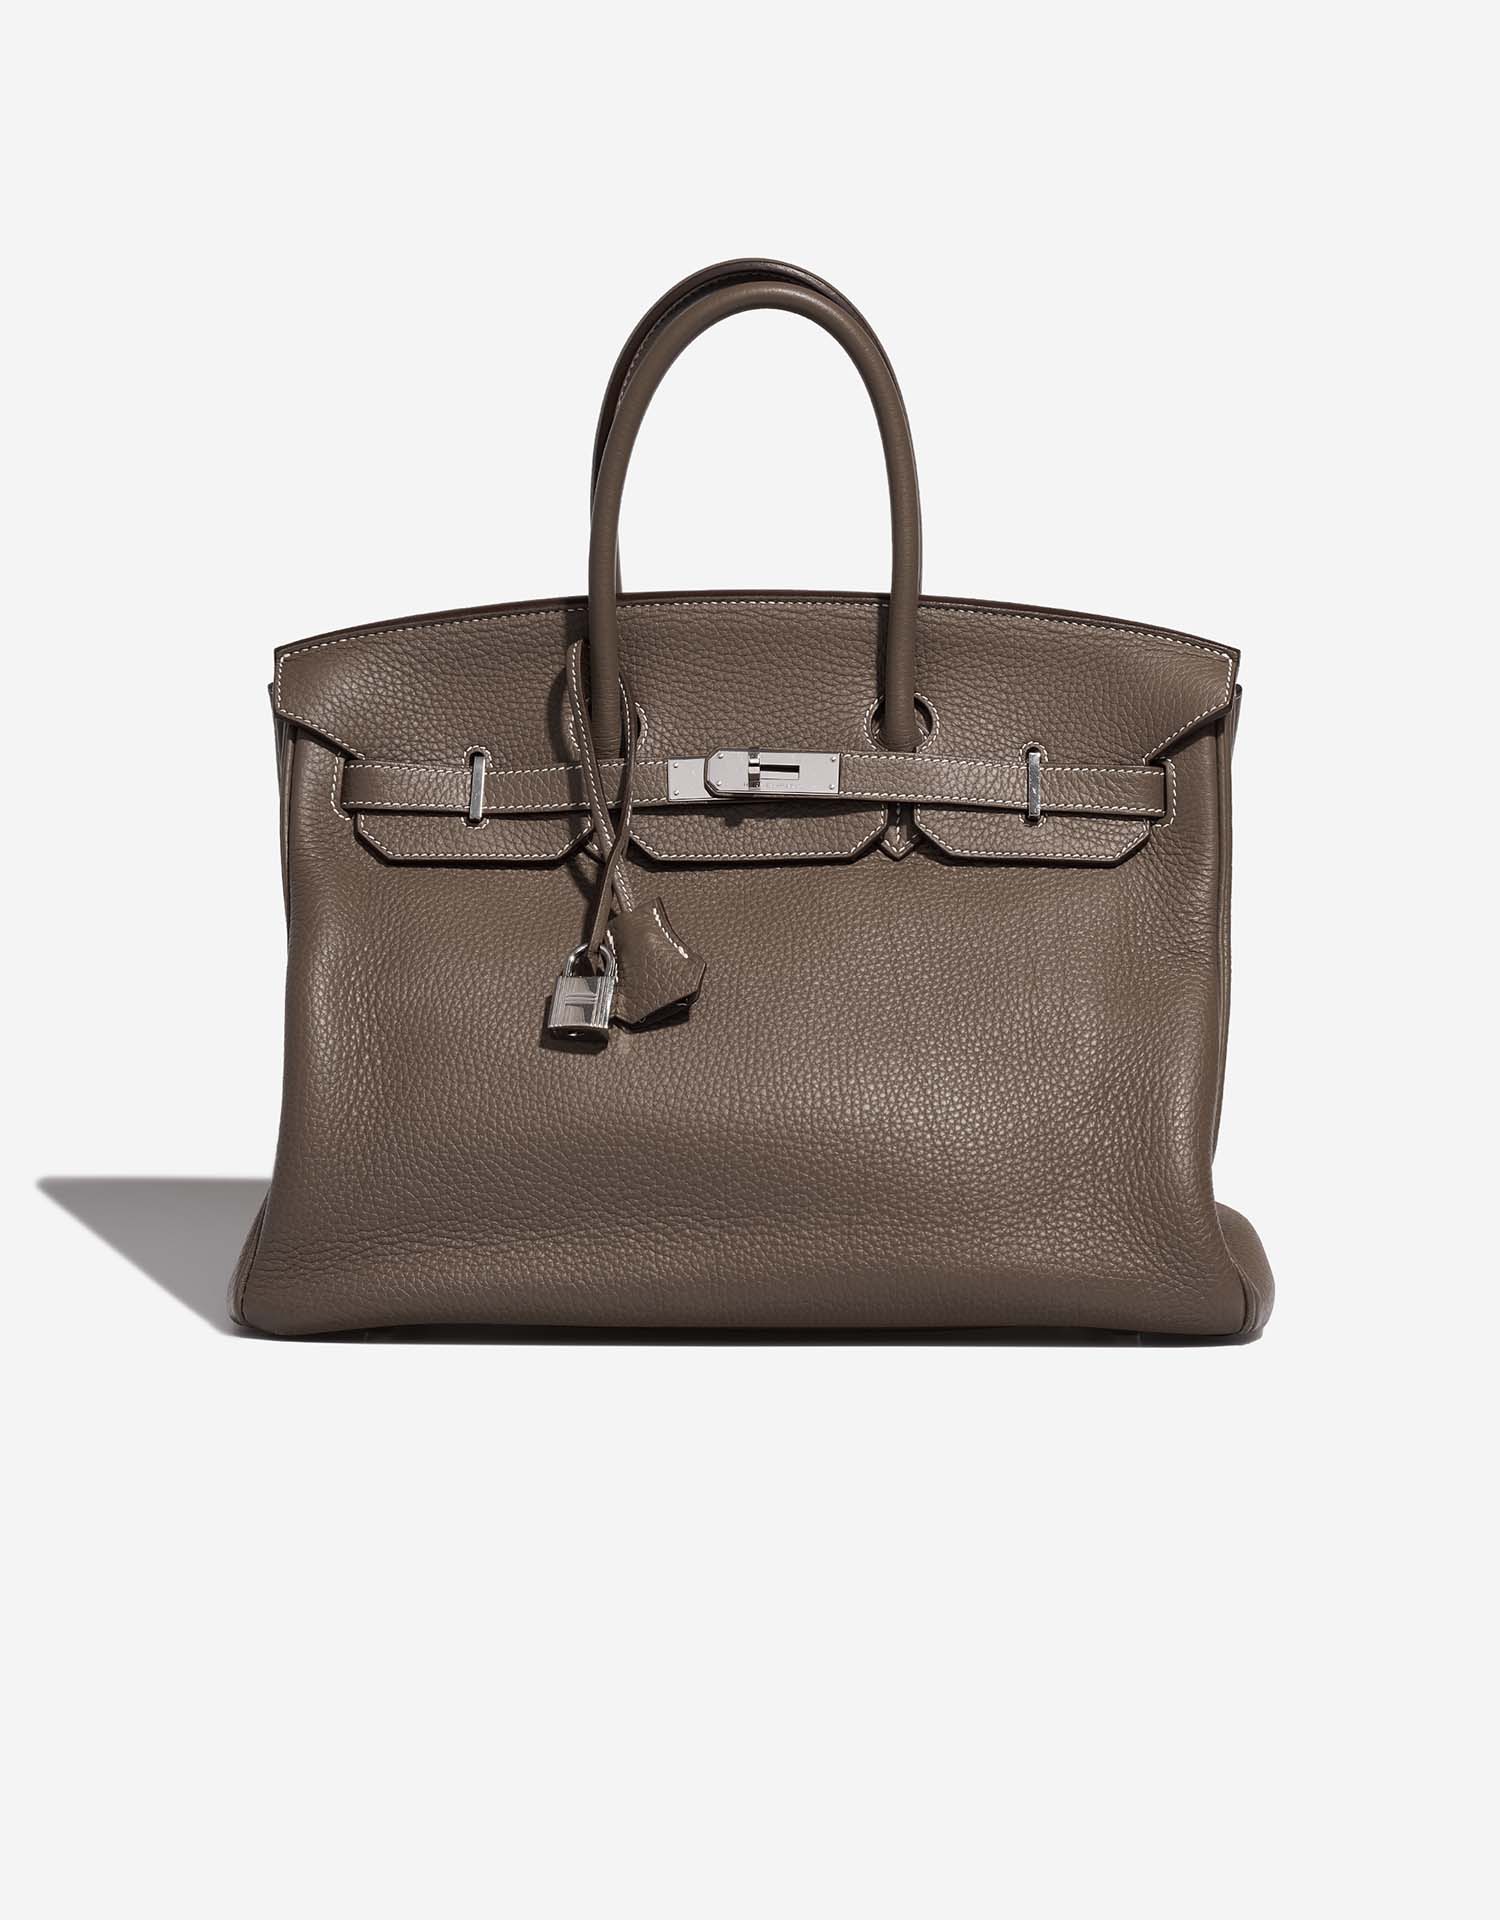 Hermès Rodeo second hand prices